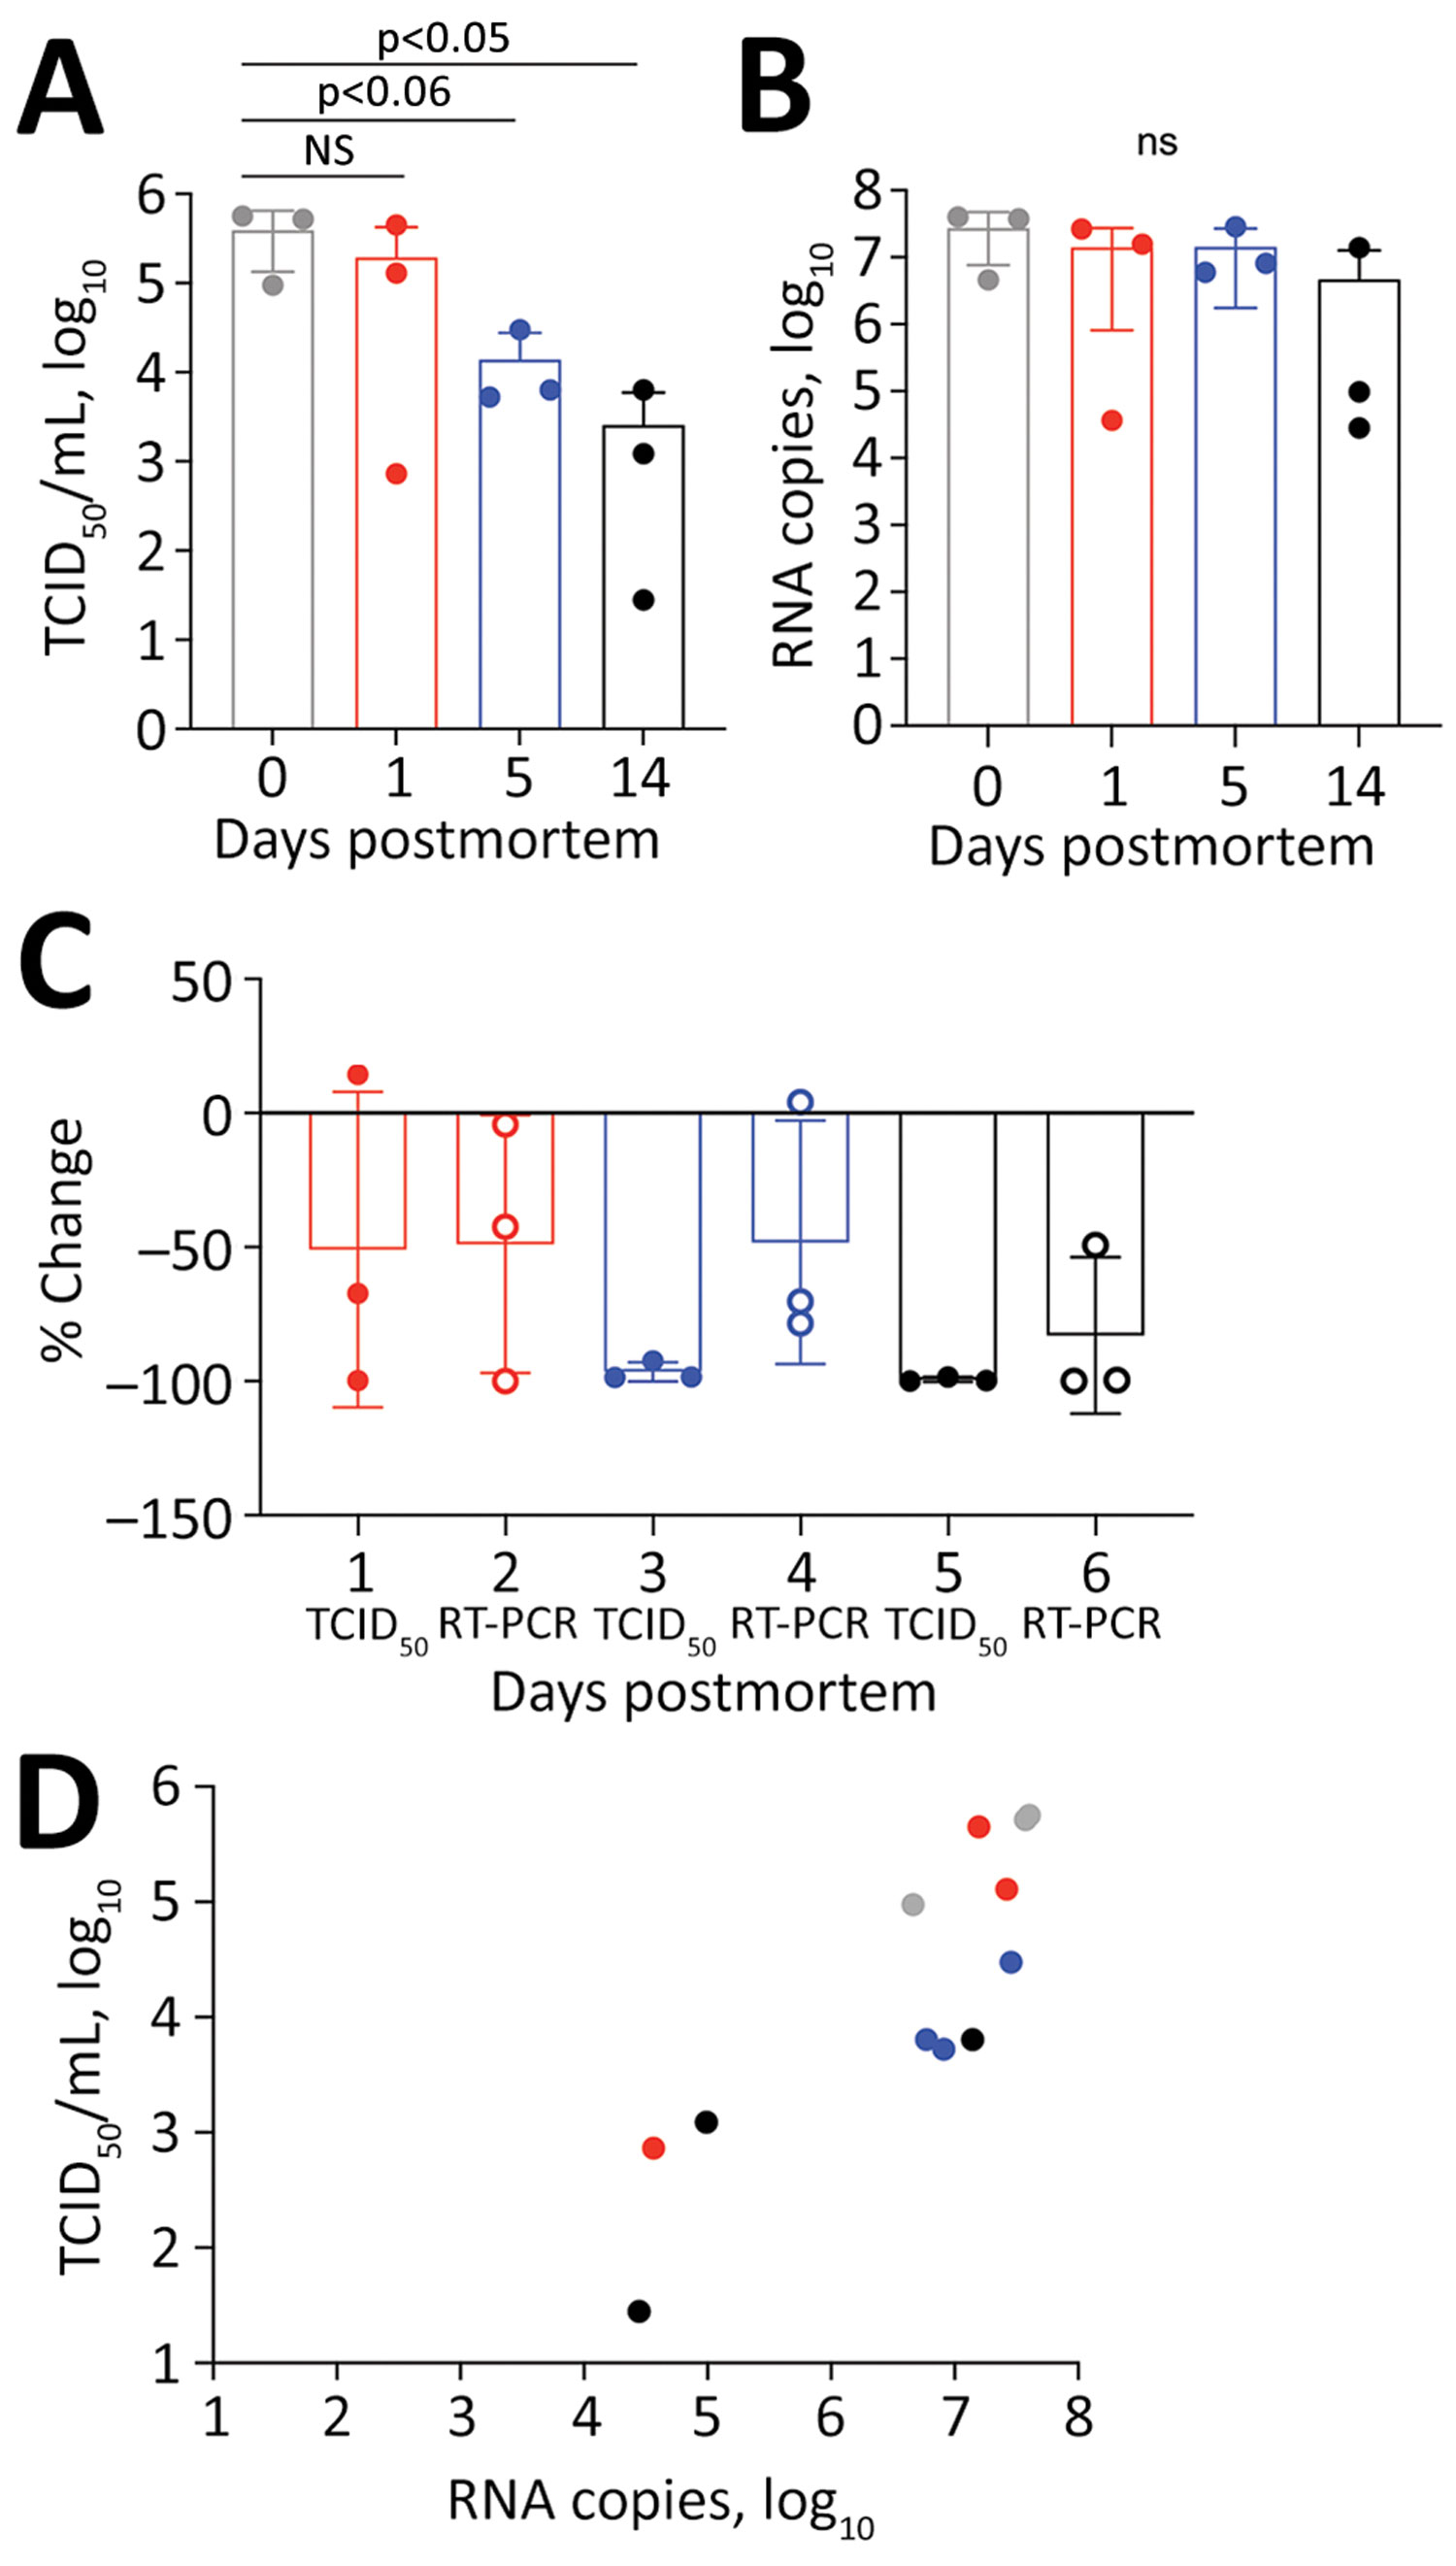 Postmortem stability of severe acute respiratory syndrome coronavirus 2 in mouse lung tissue. A) Infectious virus measured by TCID50 of VeroE6 cells. B) Viral RNA measured by copies of N gene detected by RT-PCR. C) Percentage change compared with day 0. D) Correlation between infectious virus and viral RNA. R2 = 0.51; F = 0.005 by analysis of variance. NS, not significant; RT-PCR, reverse transcription PCR; TCID50, 50% tissue culture infectious dose.